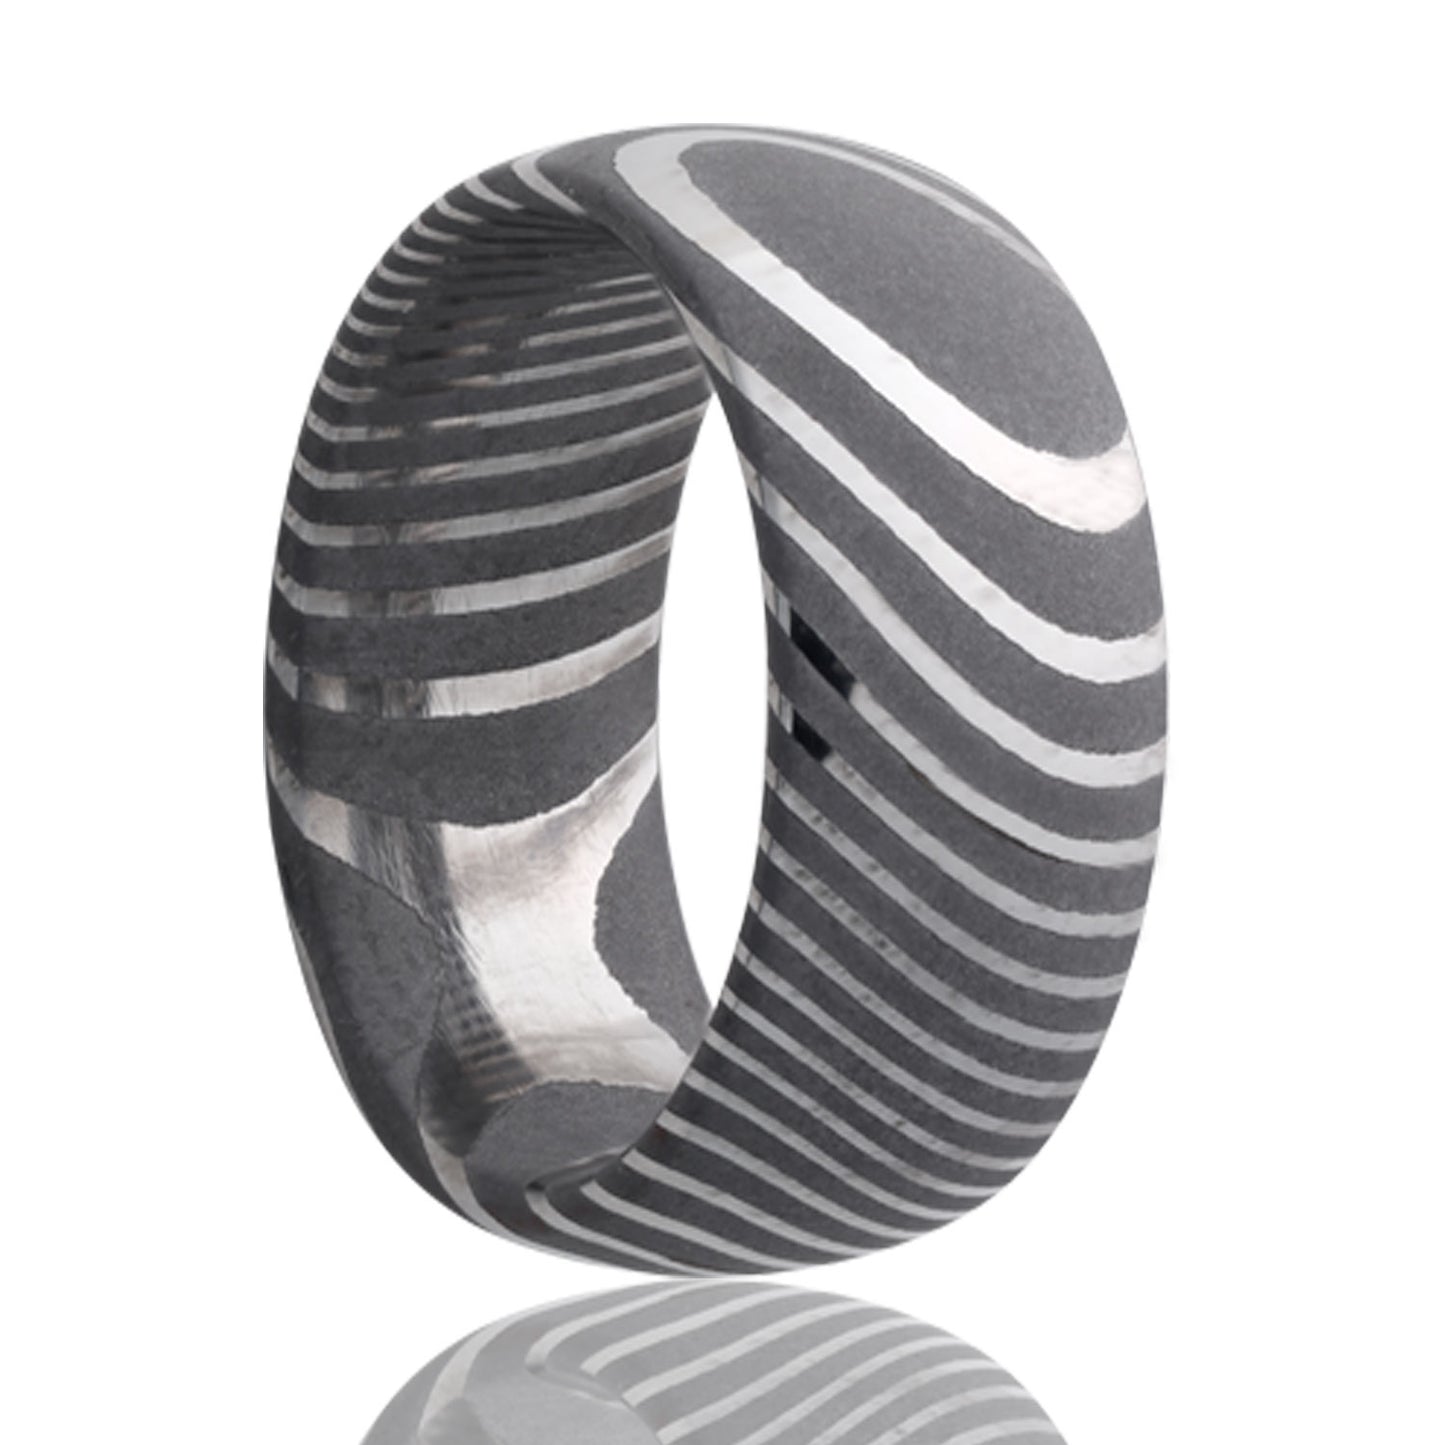 A domed damascus steel wedding band displayed on a neutral white background.